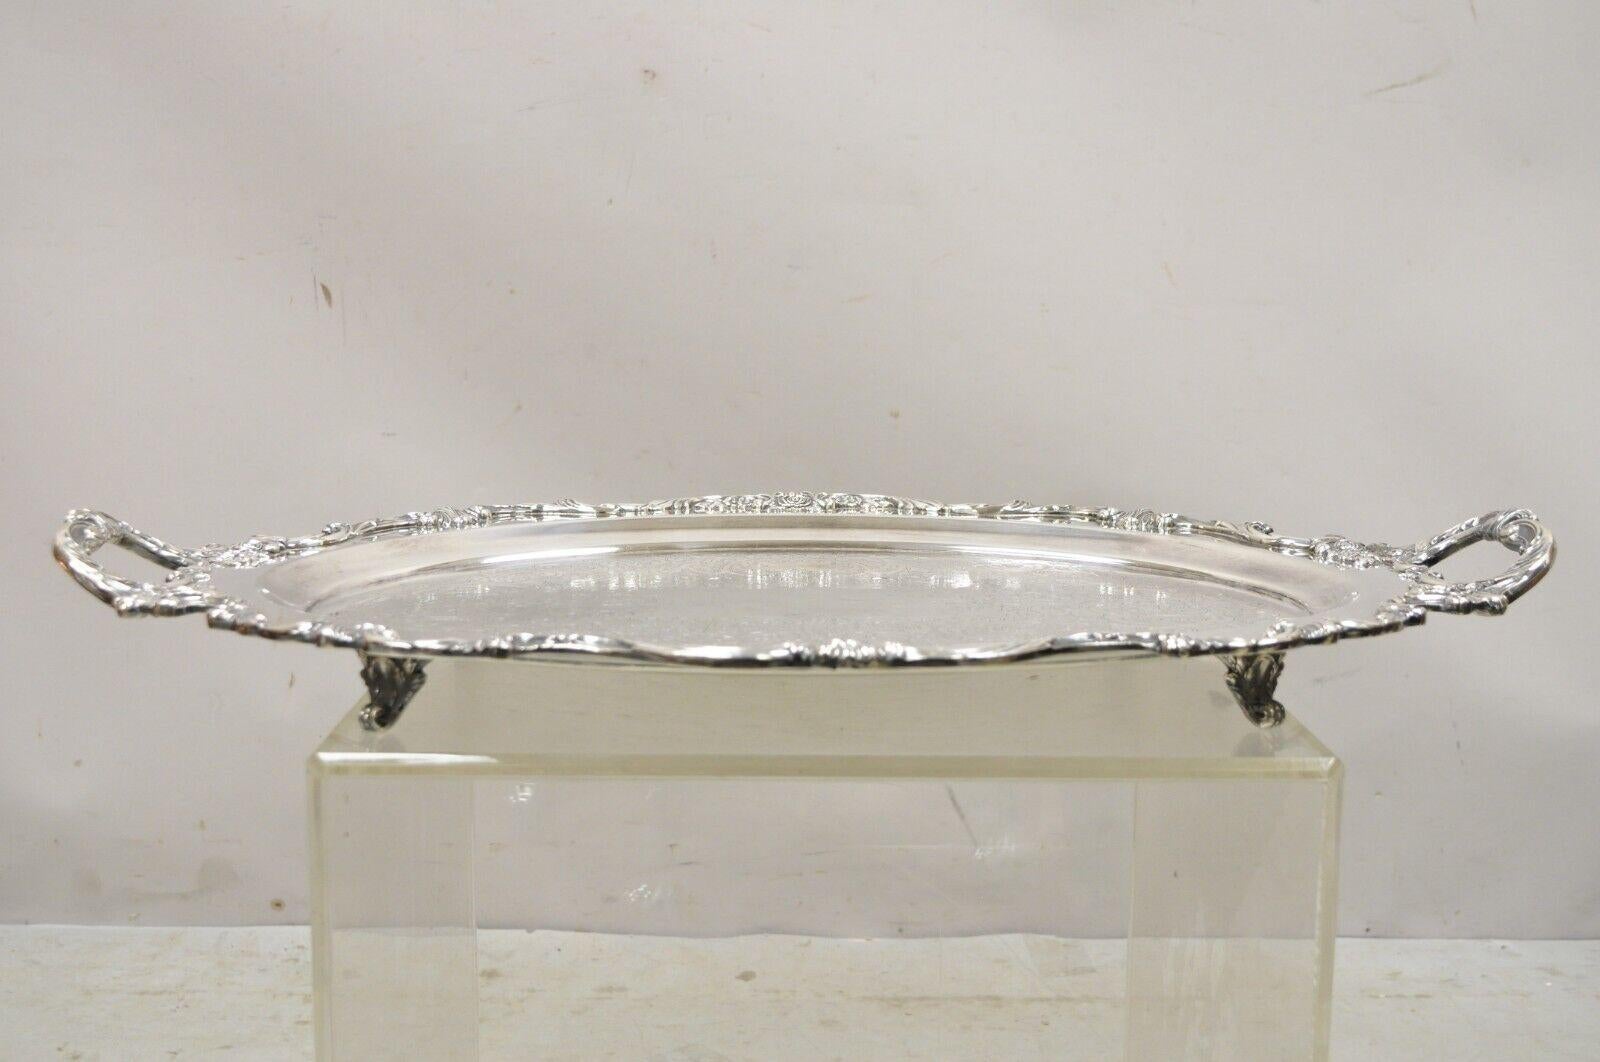 Vintage Wallace Royal Rose 9826 silver plated ornate oval serving platter tray. Item features a nice oval form, ornate twin handles, scalloped form, original stamp, very nice vintage item, great style and form, circa early 1900s. Measurements: 27.5